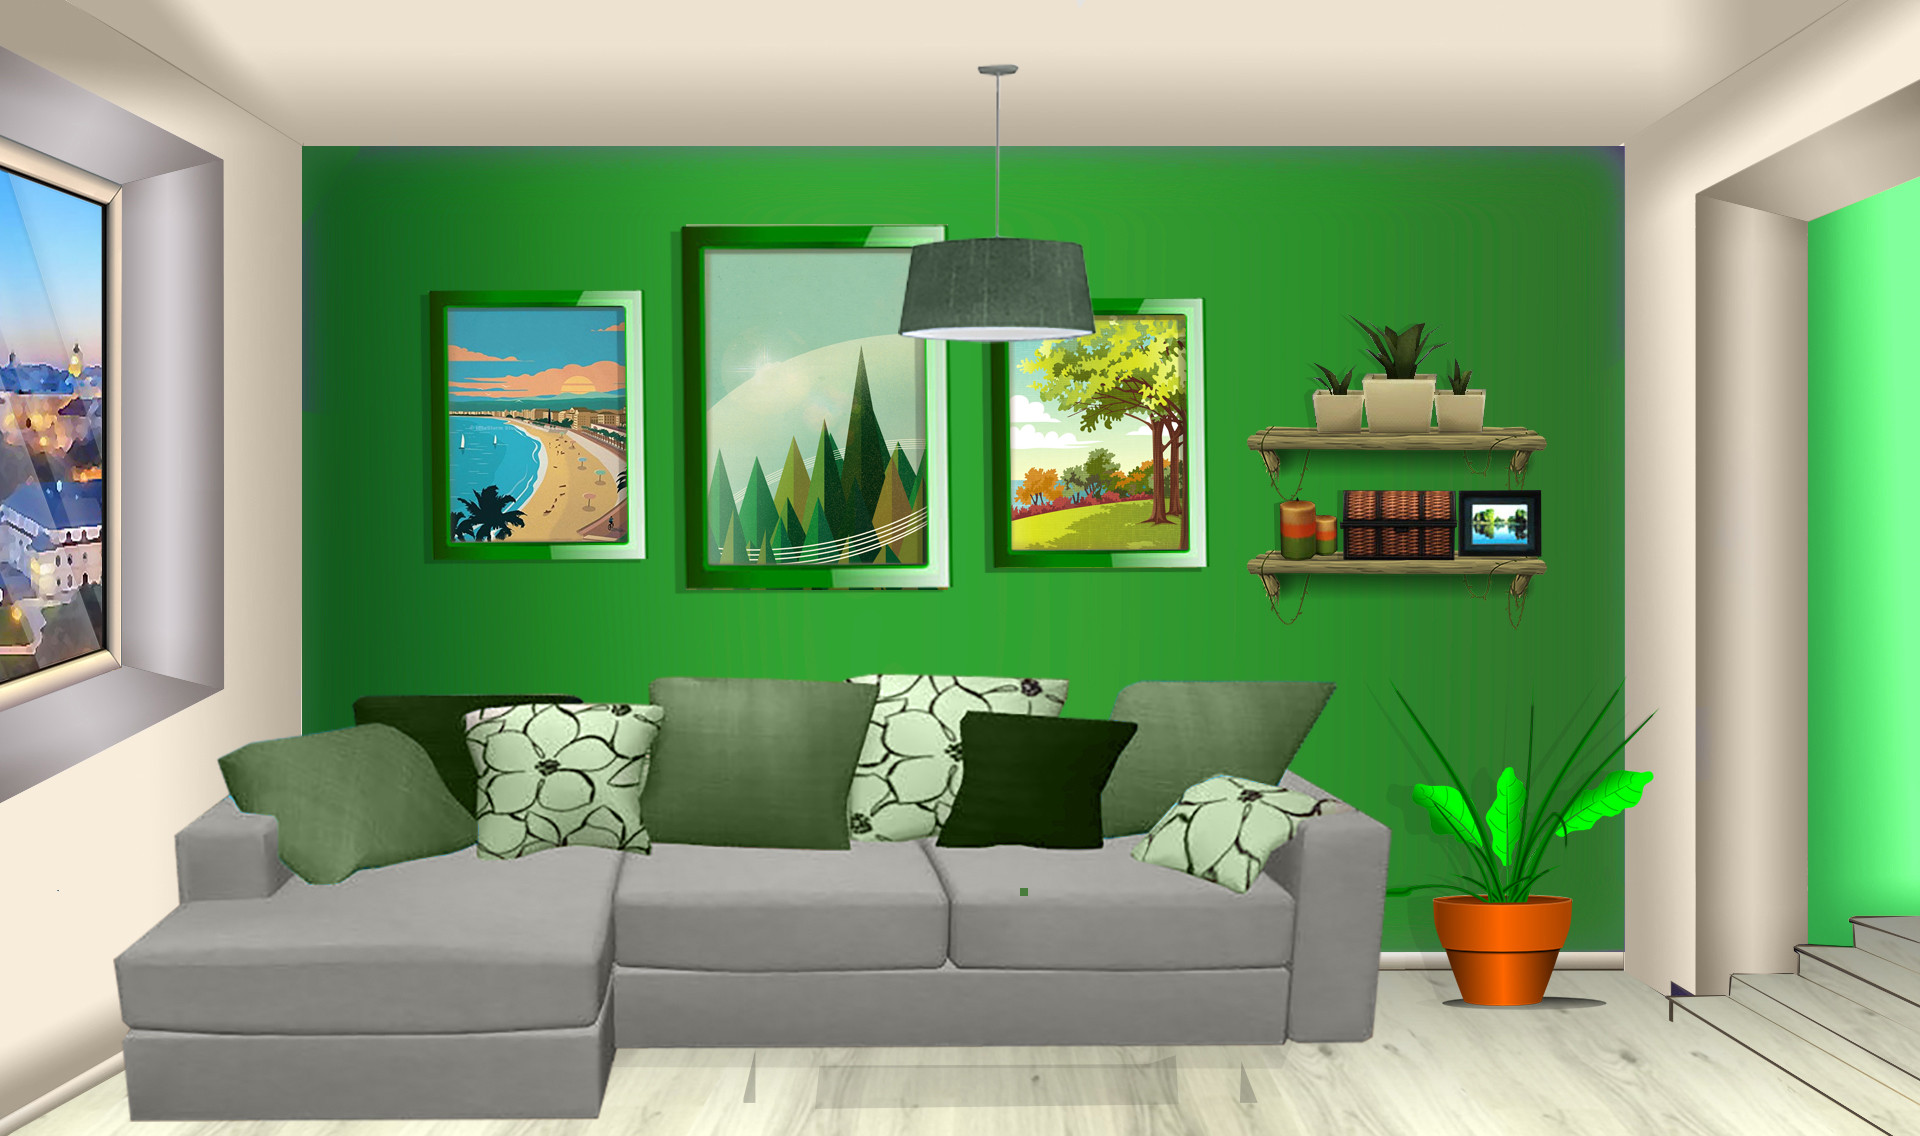 INT. APARTMENT GREEN LIVING ROOM – DAY